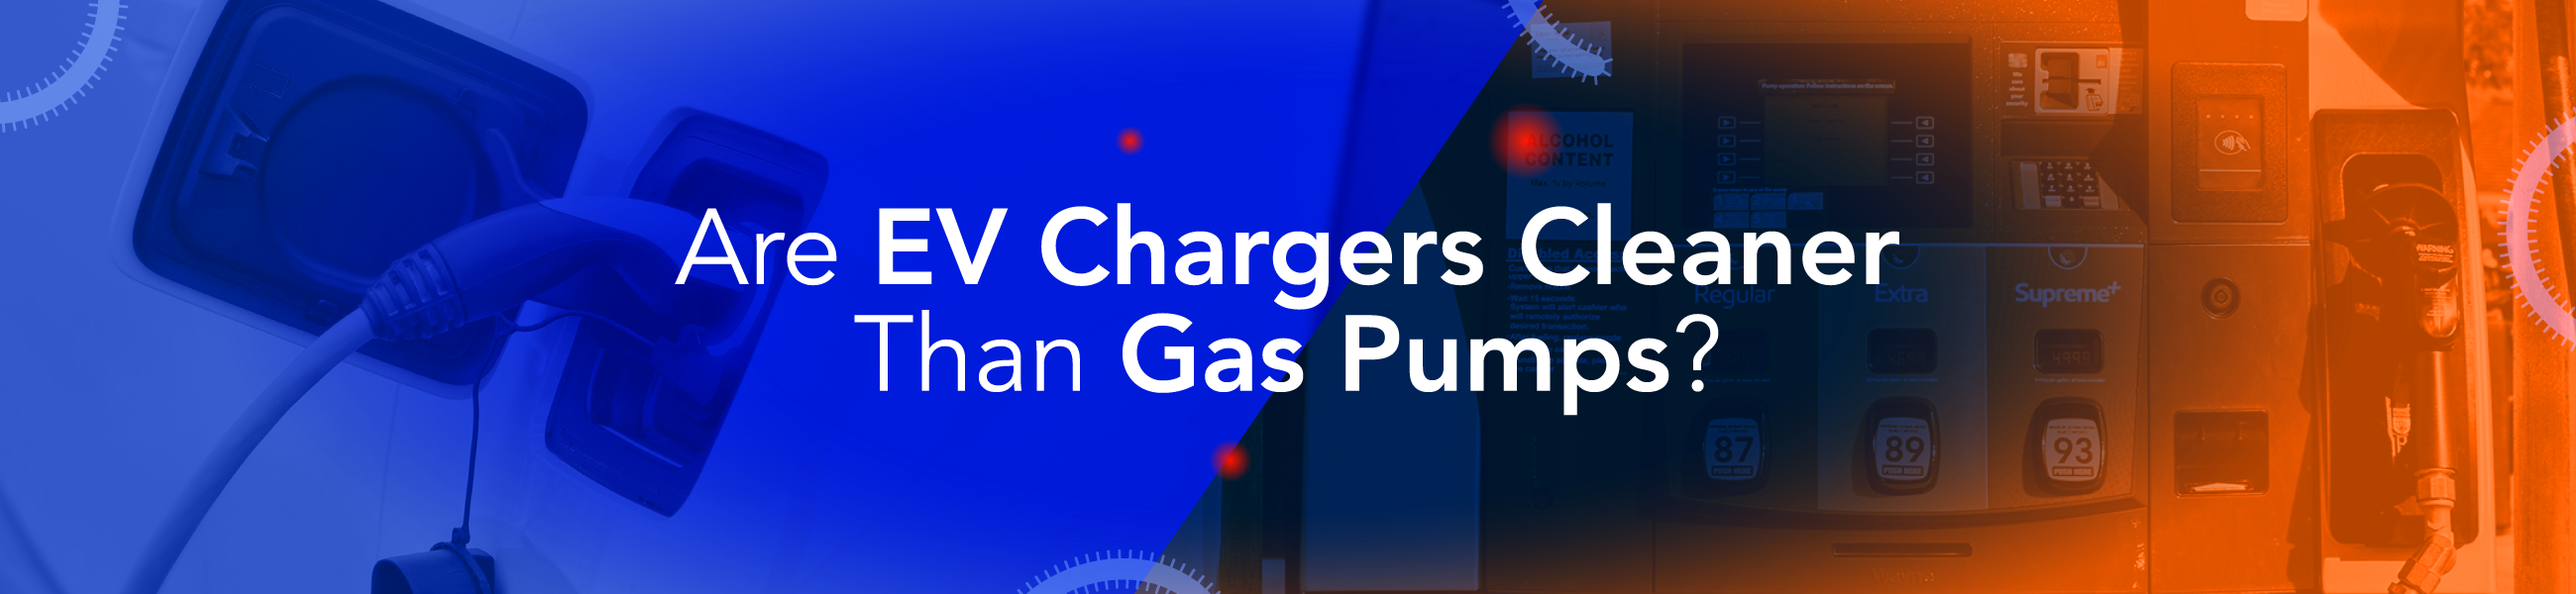 are ev chargers cleaner than gas pumps